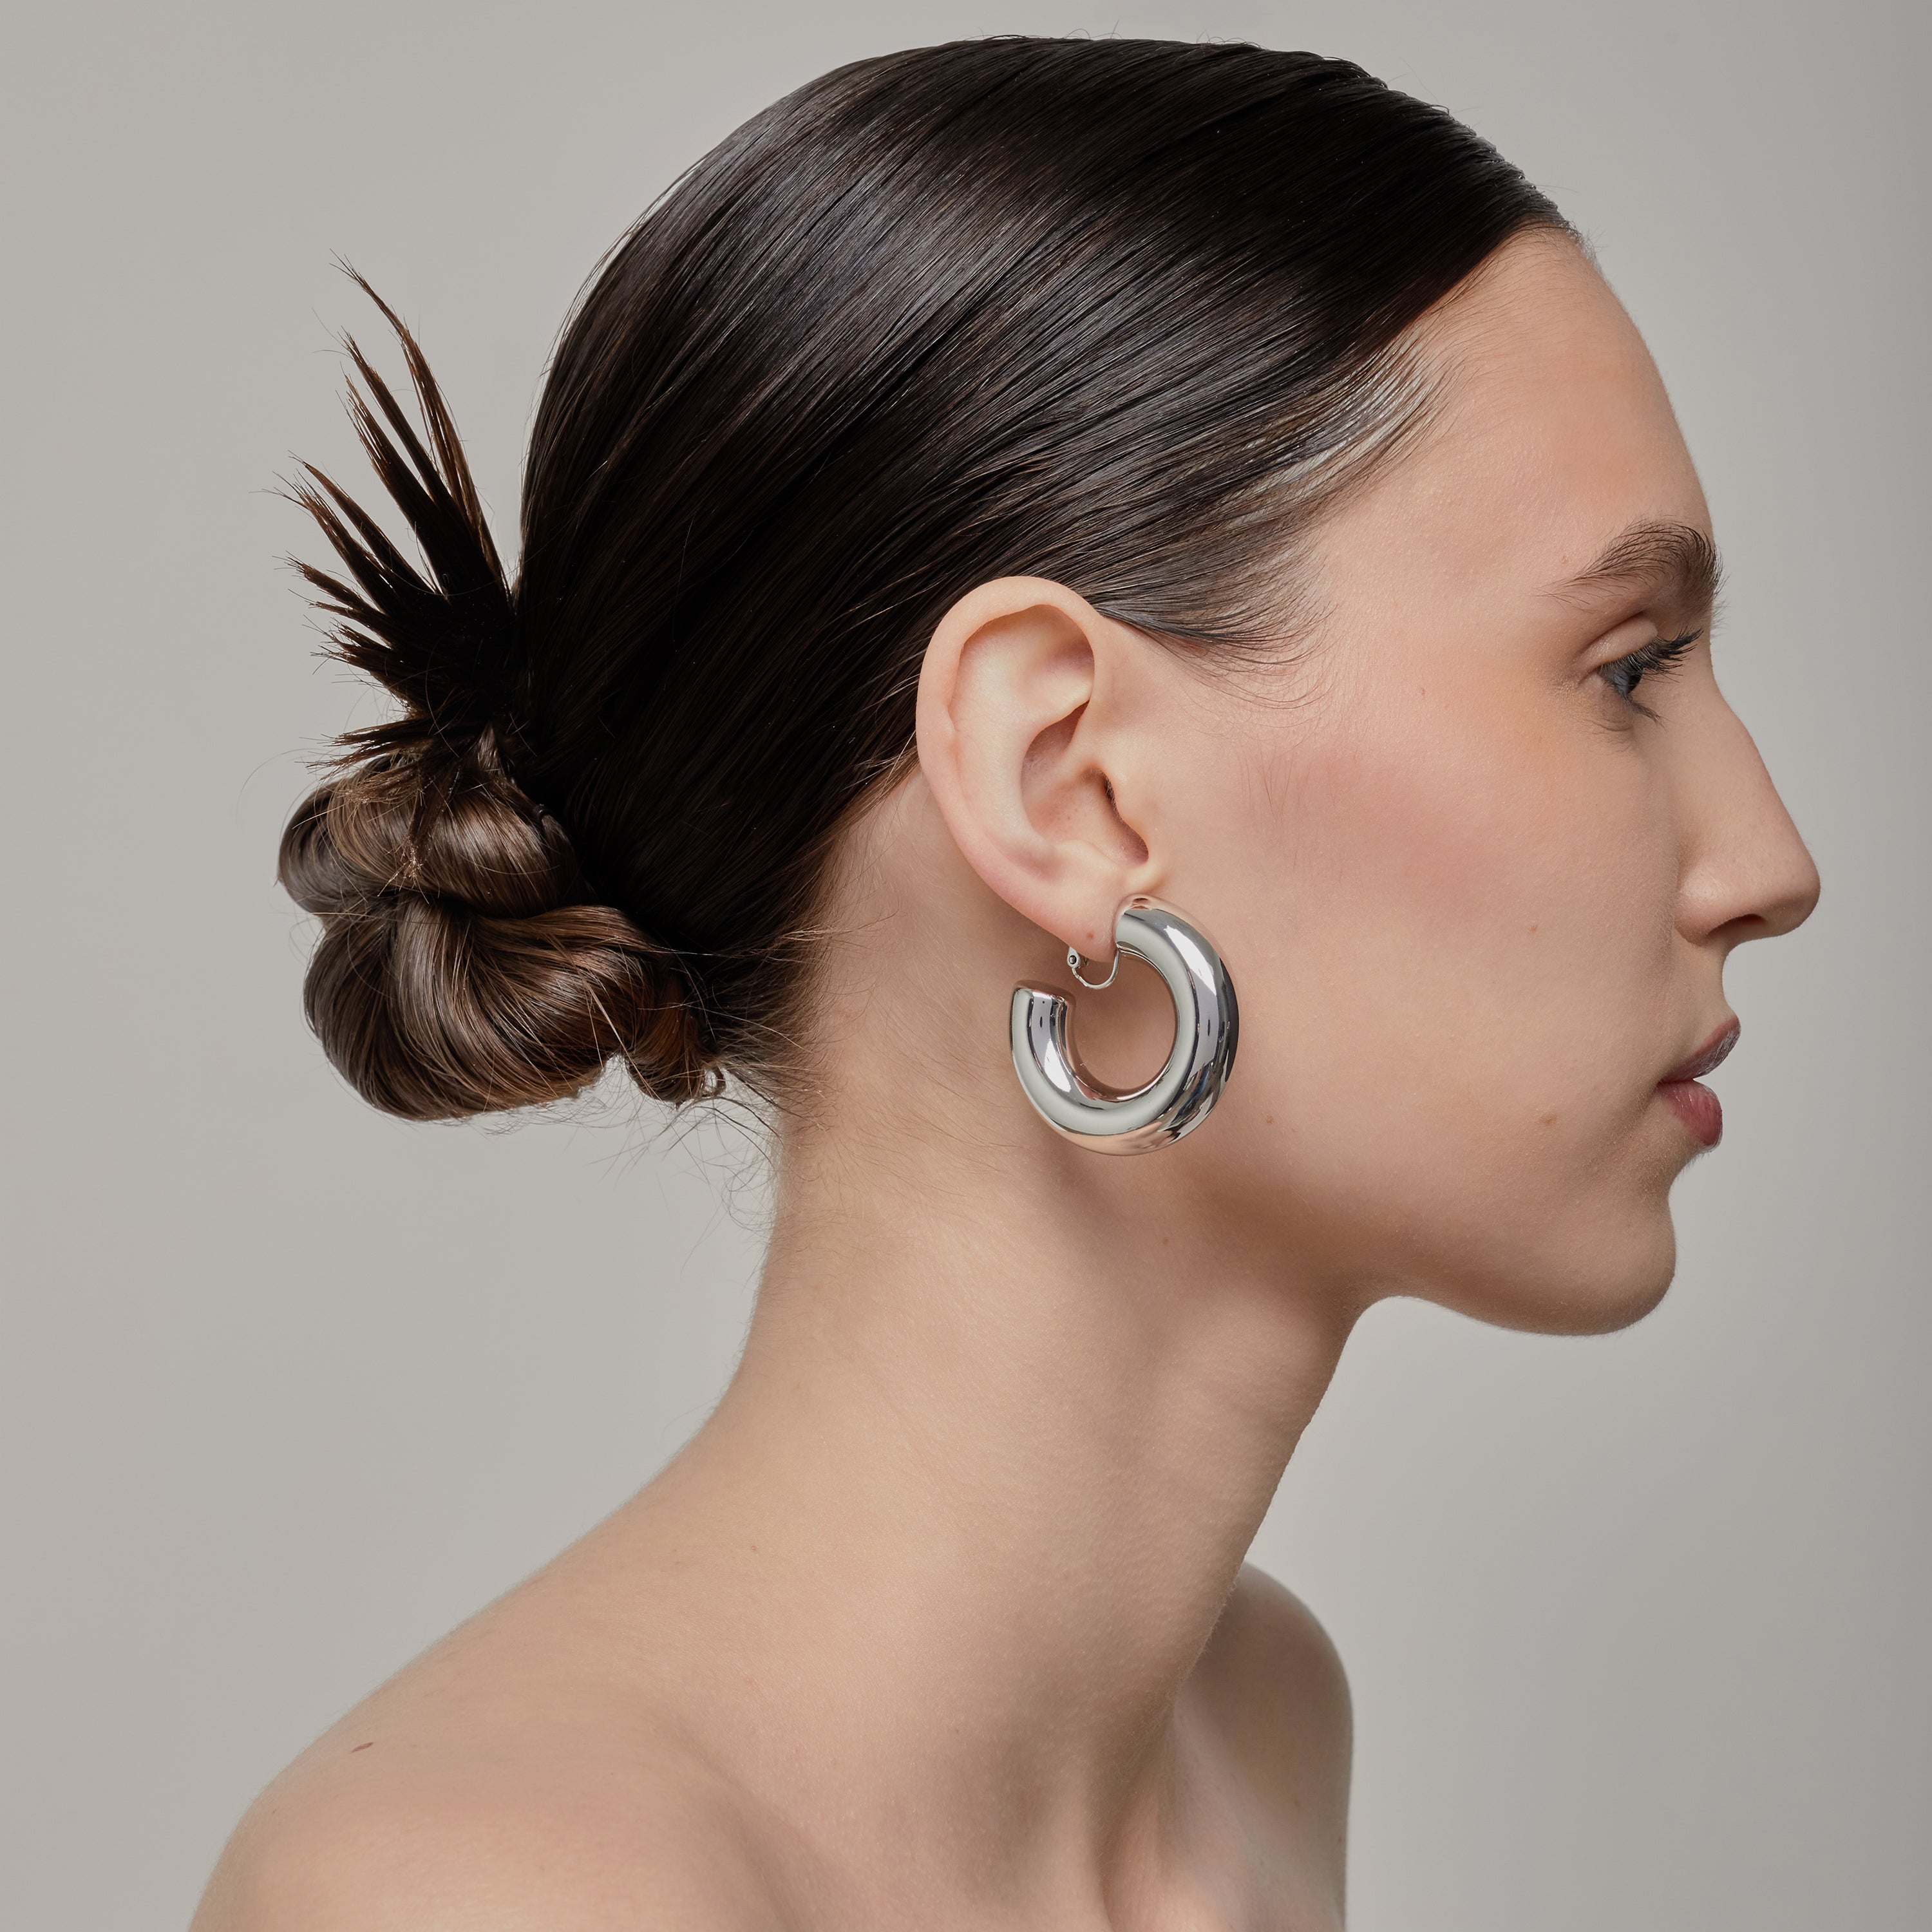 A model wearing the Chunky Hoop Clip On Earrings in Silver. With a secure screwback closure, these earrings are suitable for a variety of ear sizes, including sensitive and keloid-prone ears. Designed for long-lasting wear and can be manually adjusted for a perfect fit. Note: includes one pair.